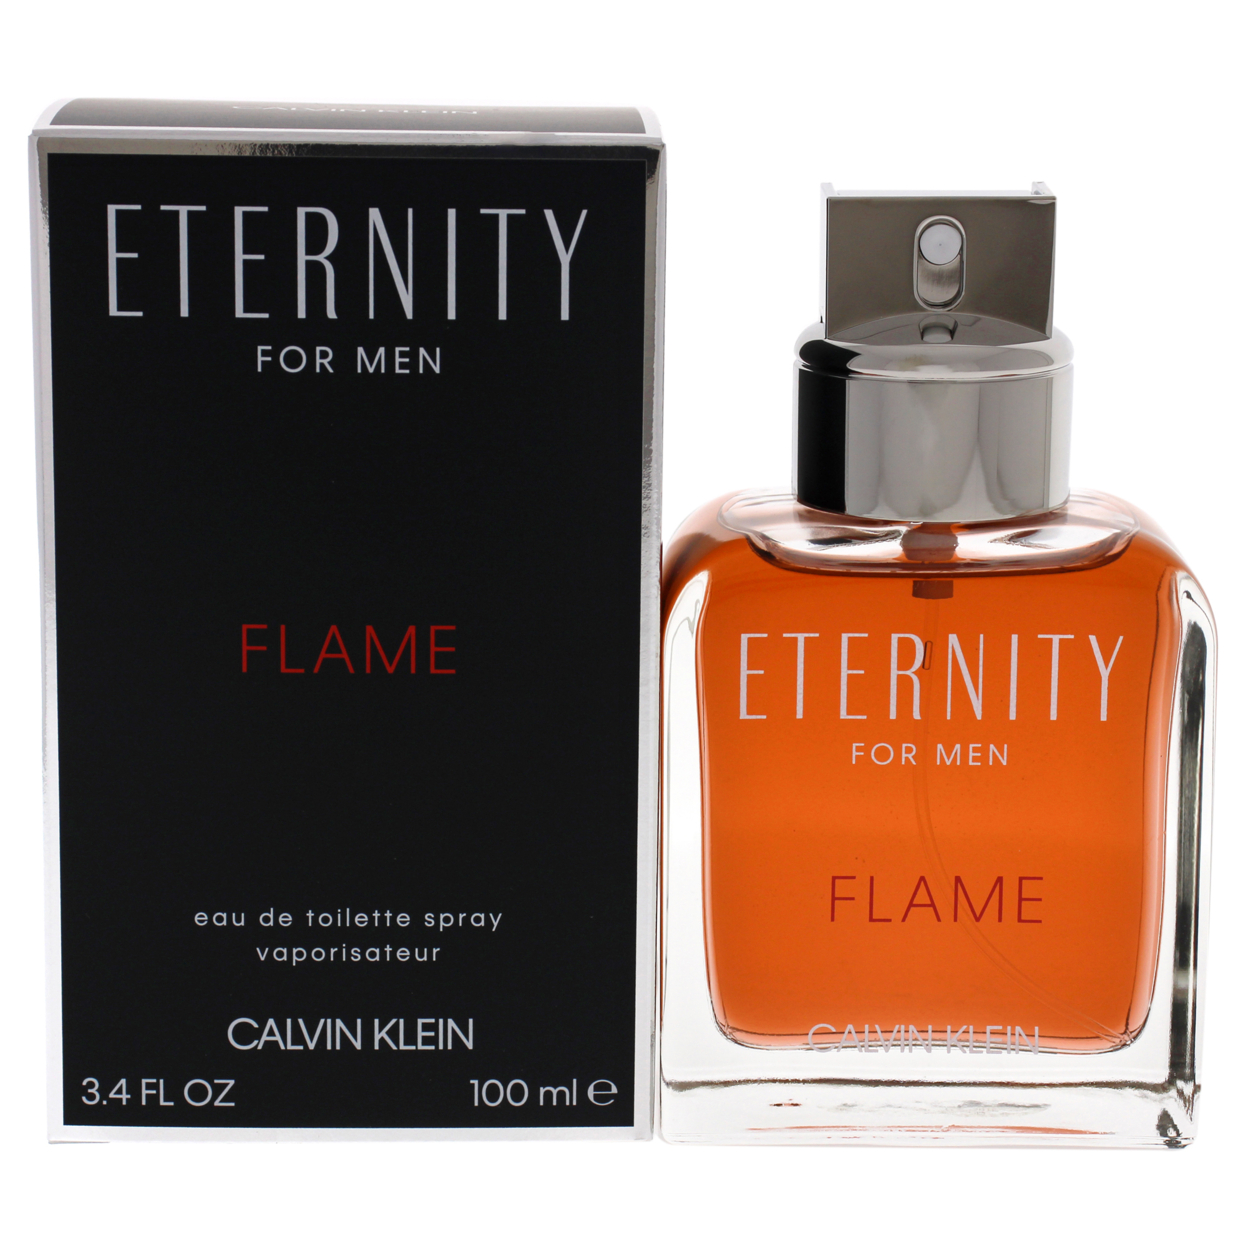 Eternity Flame by Calvin Klein for Men - 3.4 oz EDT Spray - image 1 of 3